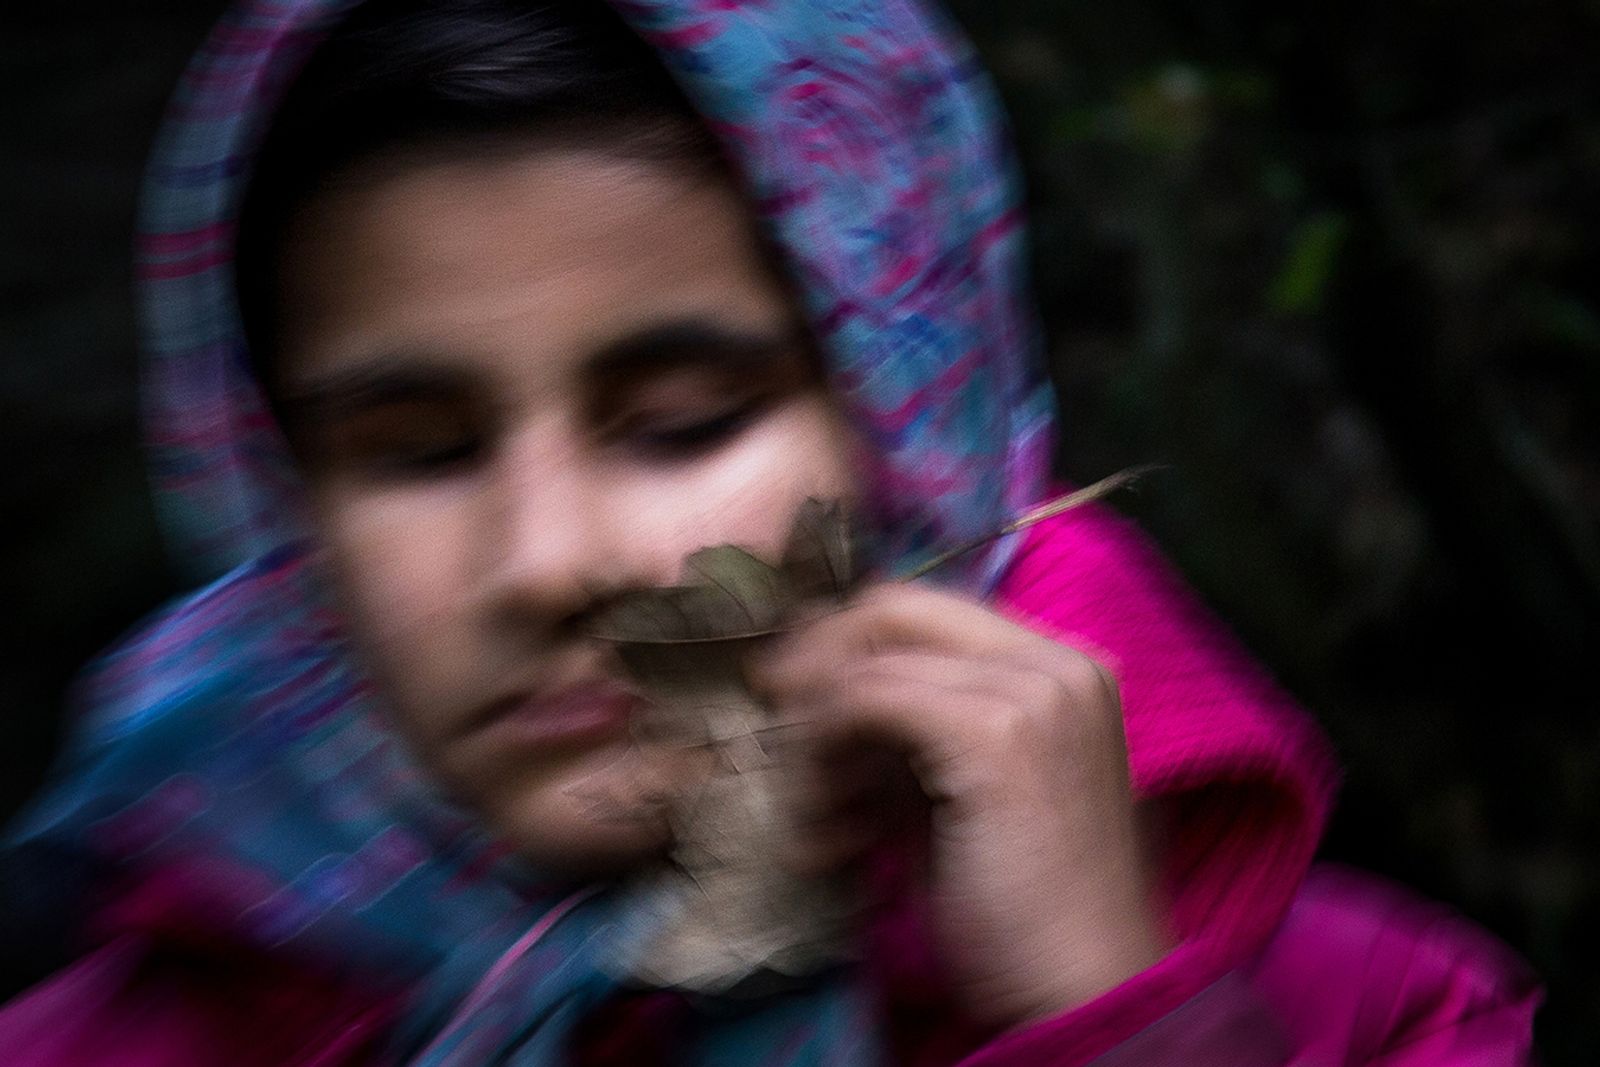 © Zohreh Saberi - Raheleh, 13, born blind, walking in a forest near her house. She feels the leaves by touching them with her face.